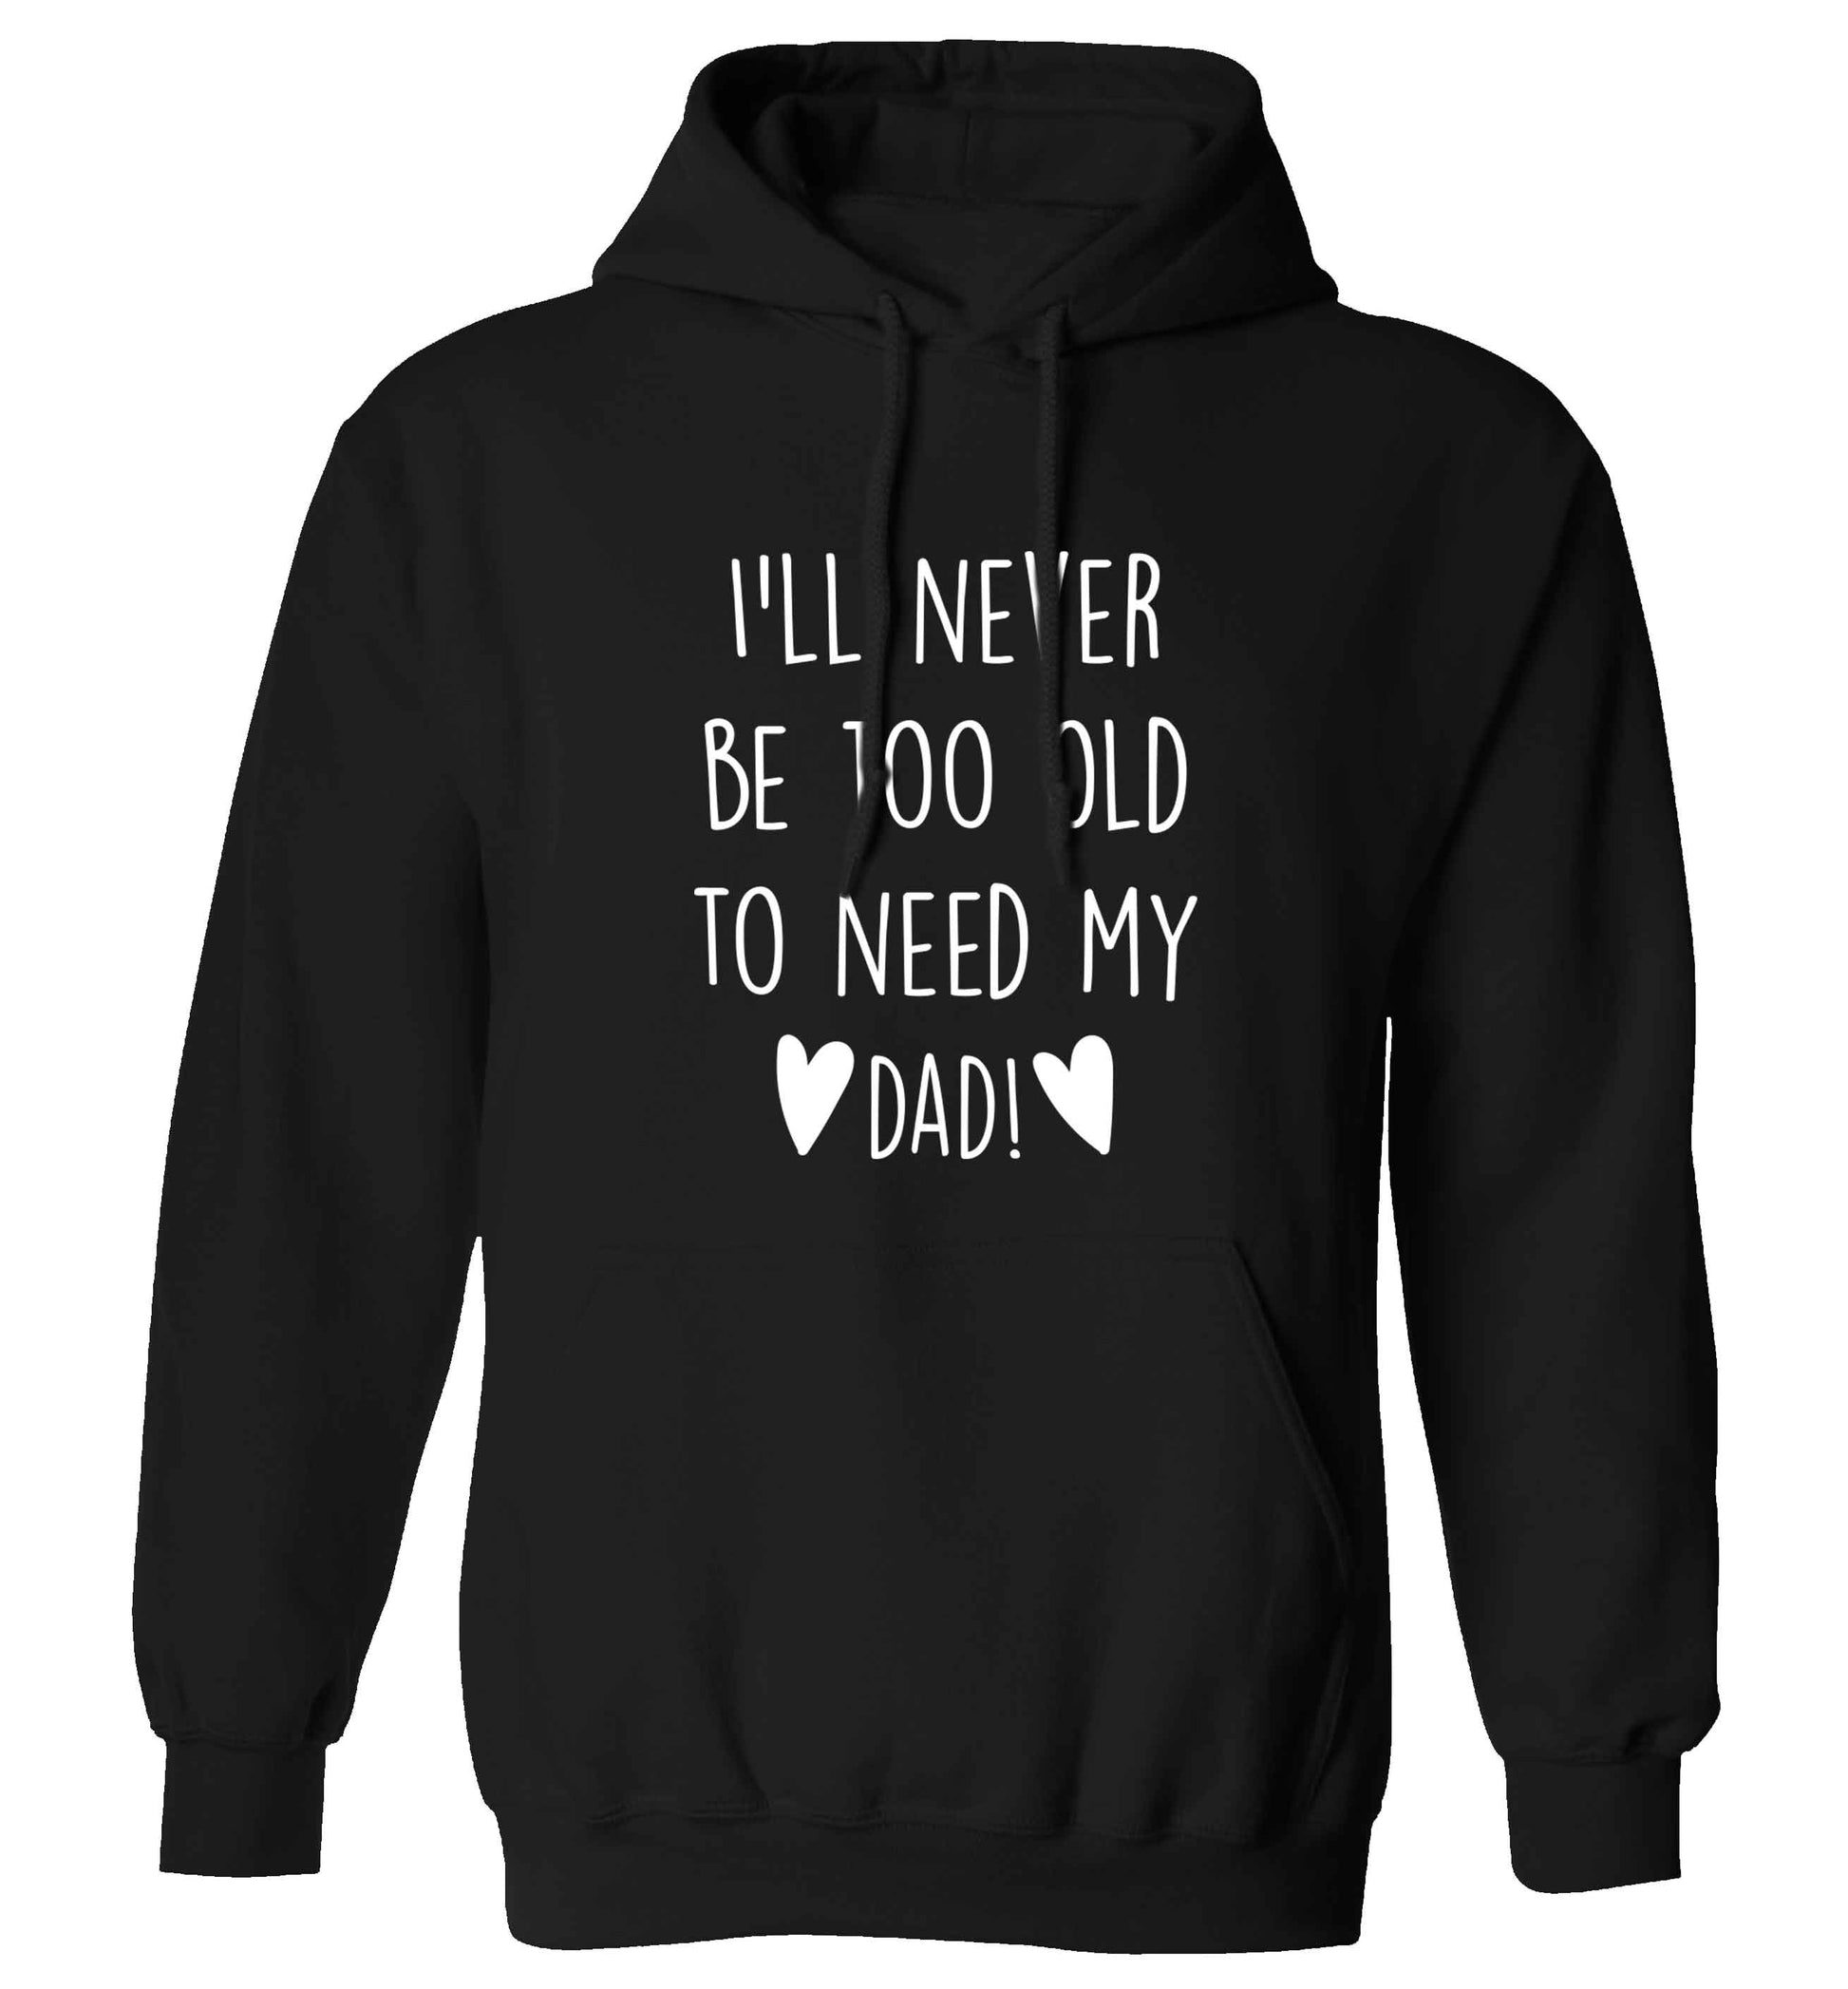 I'll never be too old to need my dad adults unisex black hoodie 2XL